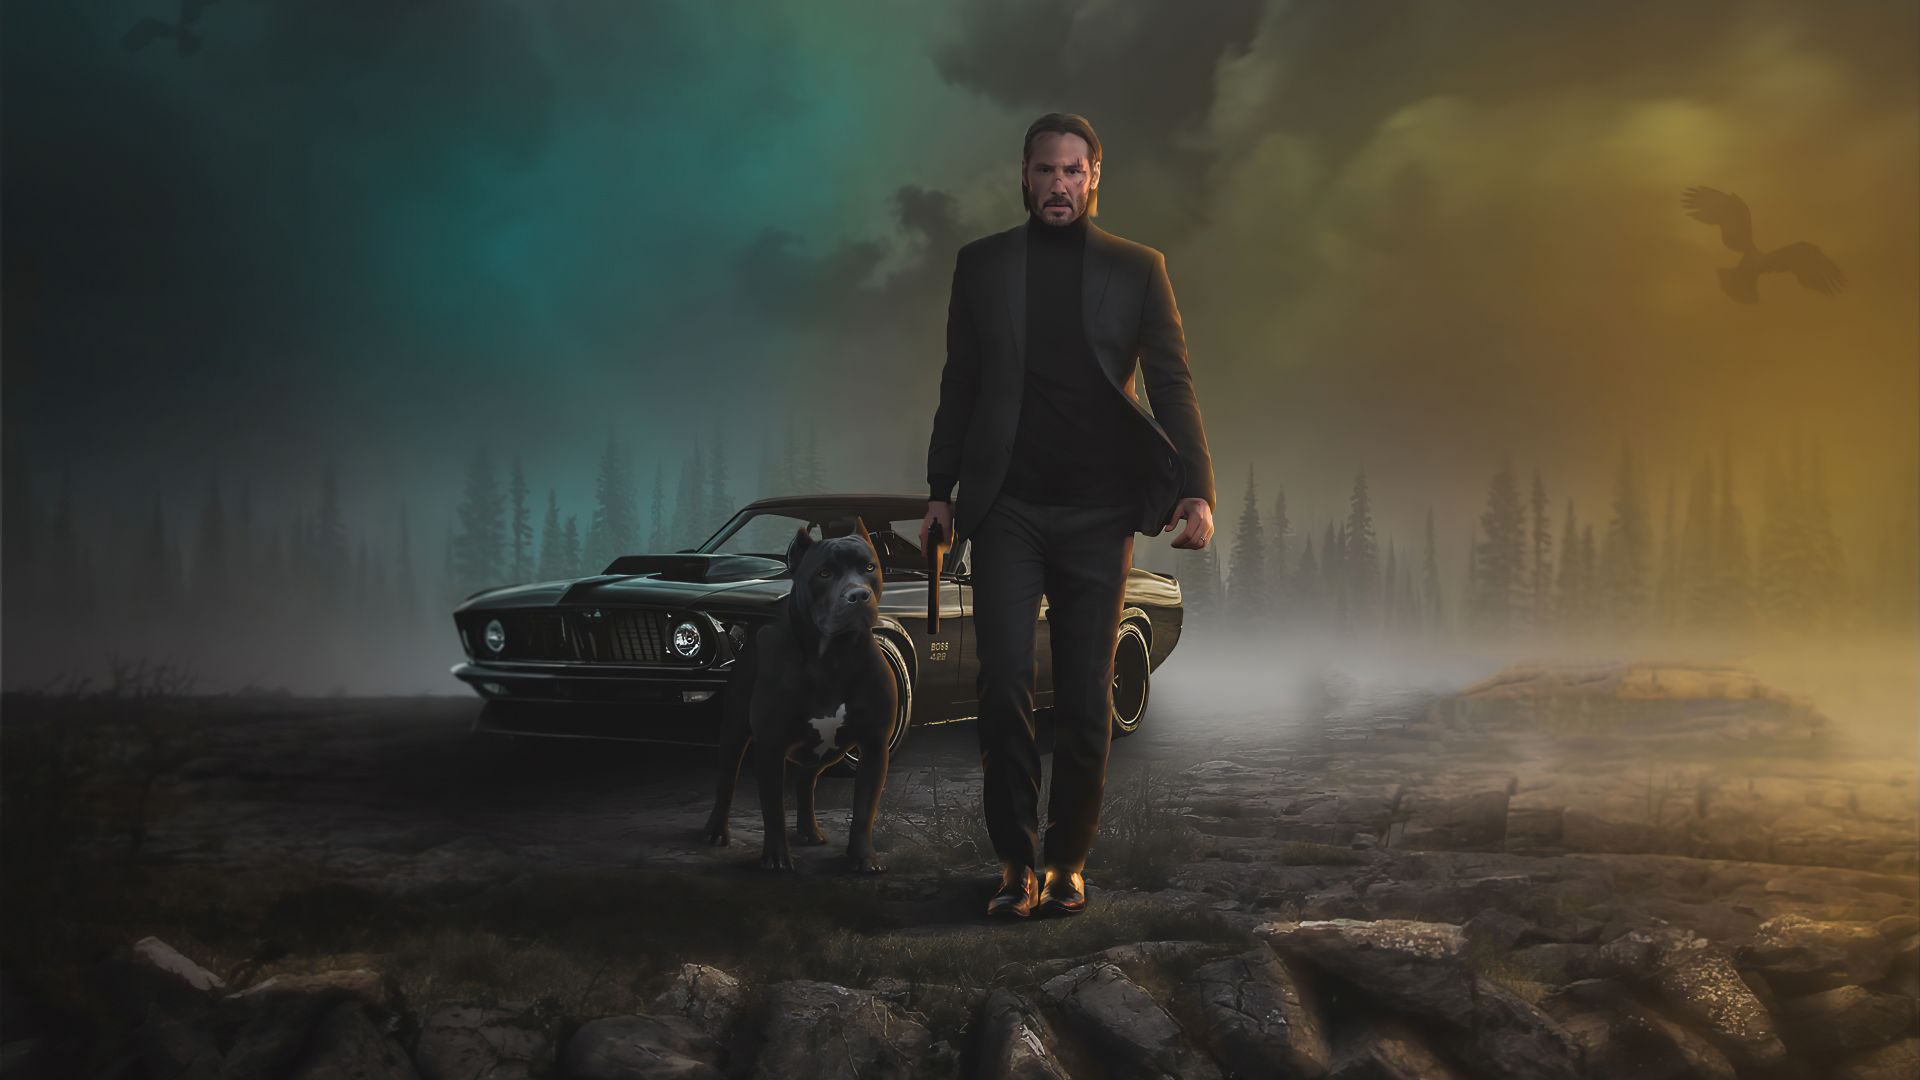 Desktop wallpaper john wick and dog, movie art, HD image, picture, background, a0222c